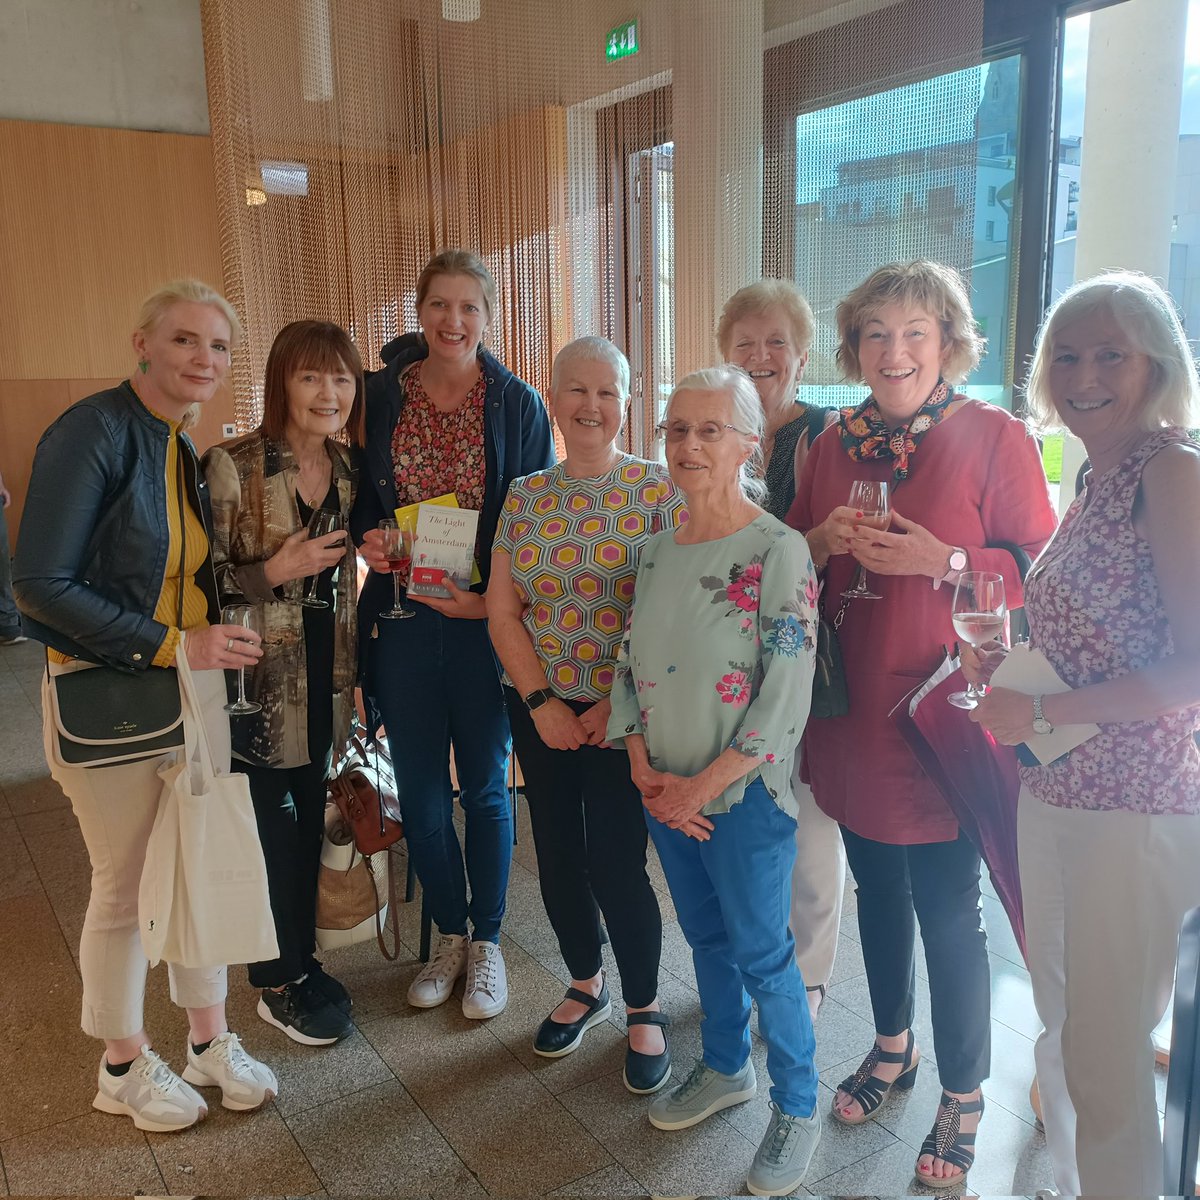 Wonderful to bring our online book club together tonight @dlrLexIcon as well as many readers and readers from other bookclubs to listen to David Park in conversation with Mary Burnham. Wonderful evening! #loveBooks #LoveLibraries #bookClubs